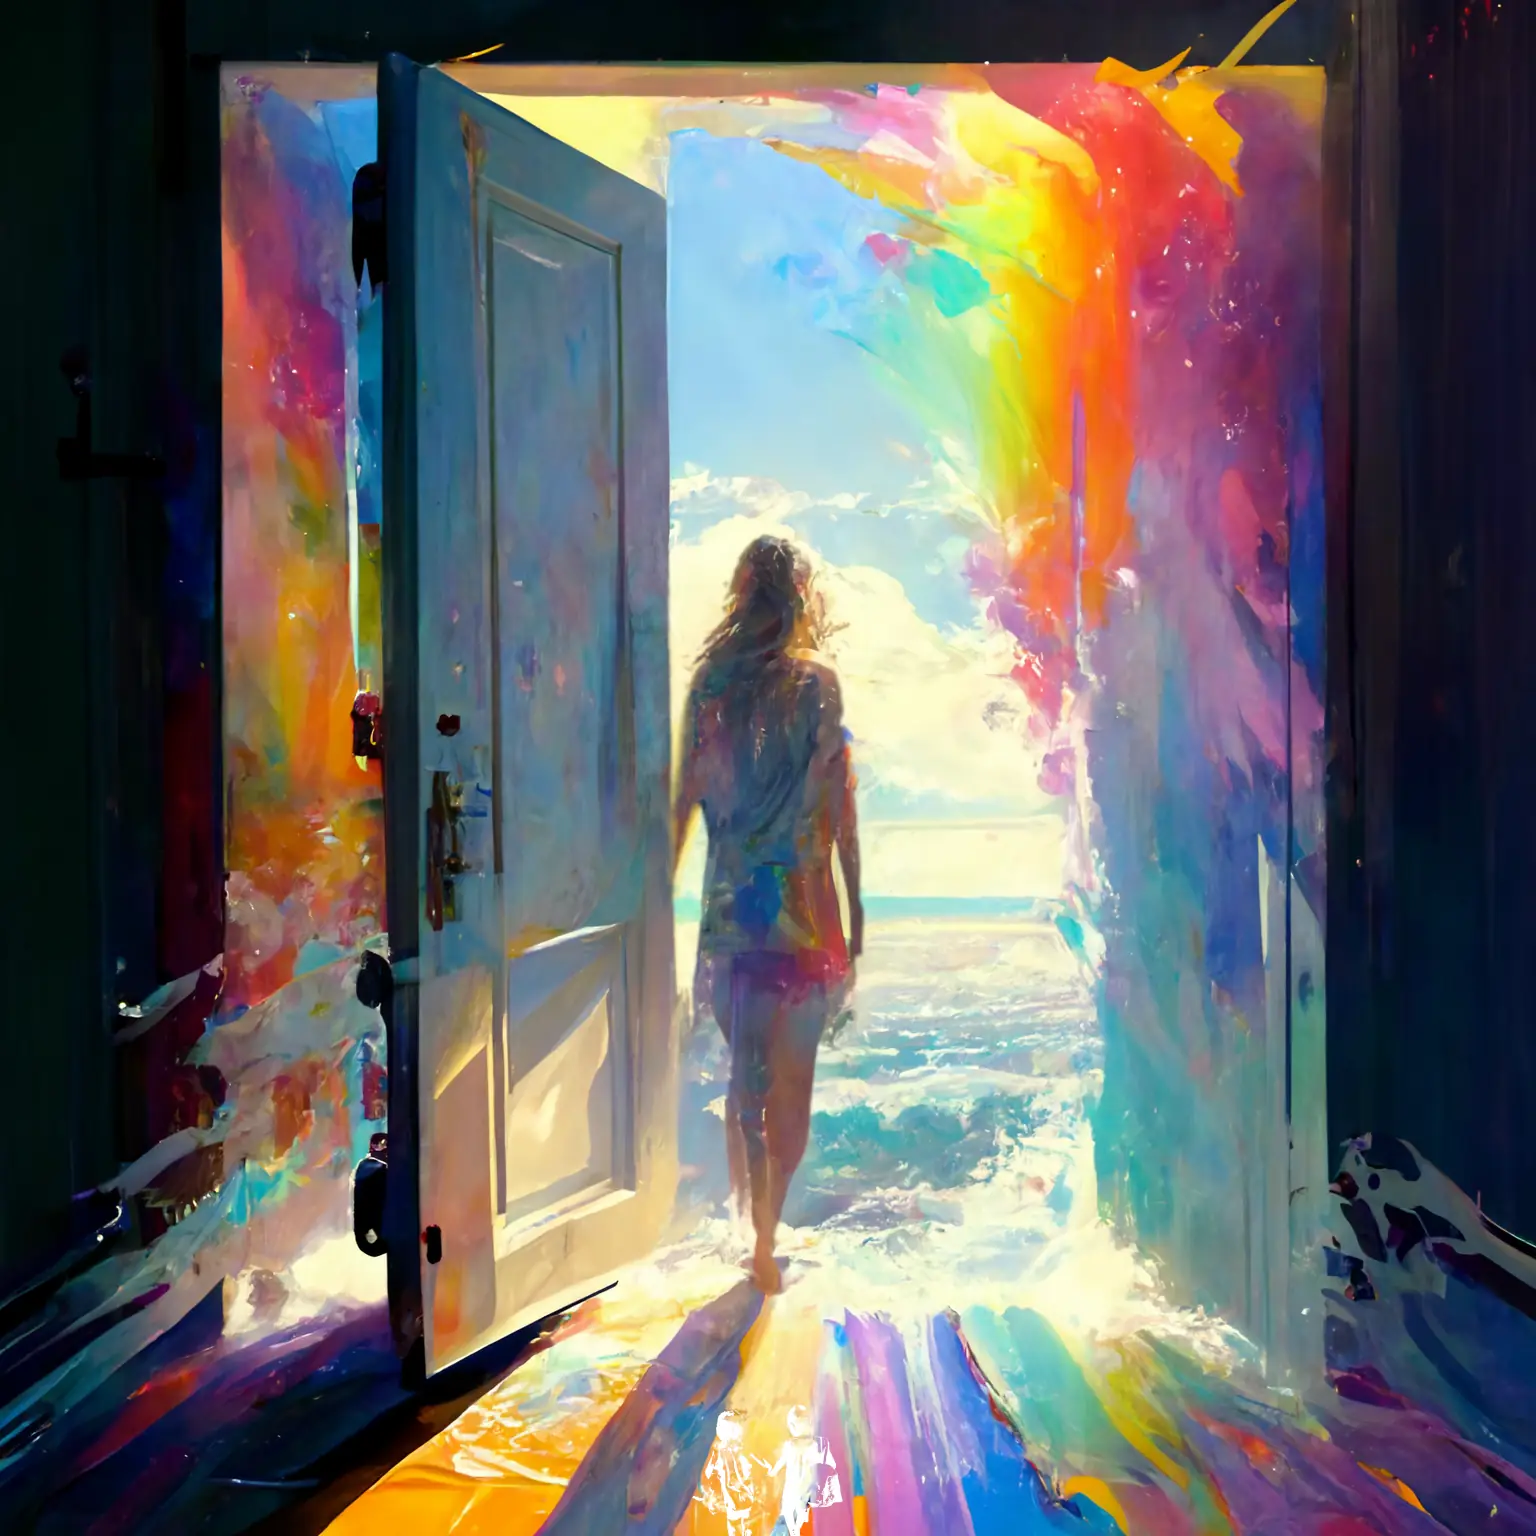 A colourful artistic rendering of a woman standing in an open doorway looking out on to the sea. It's a very happy and full of life image.